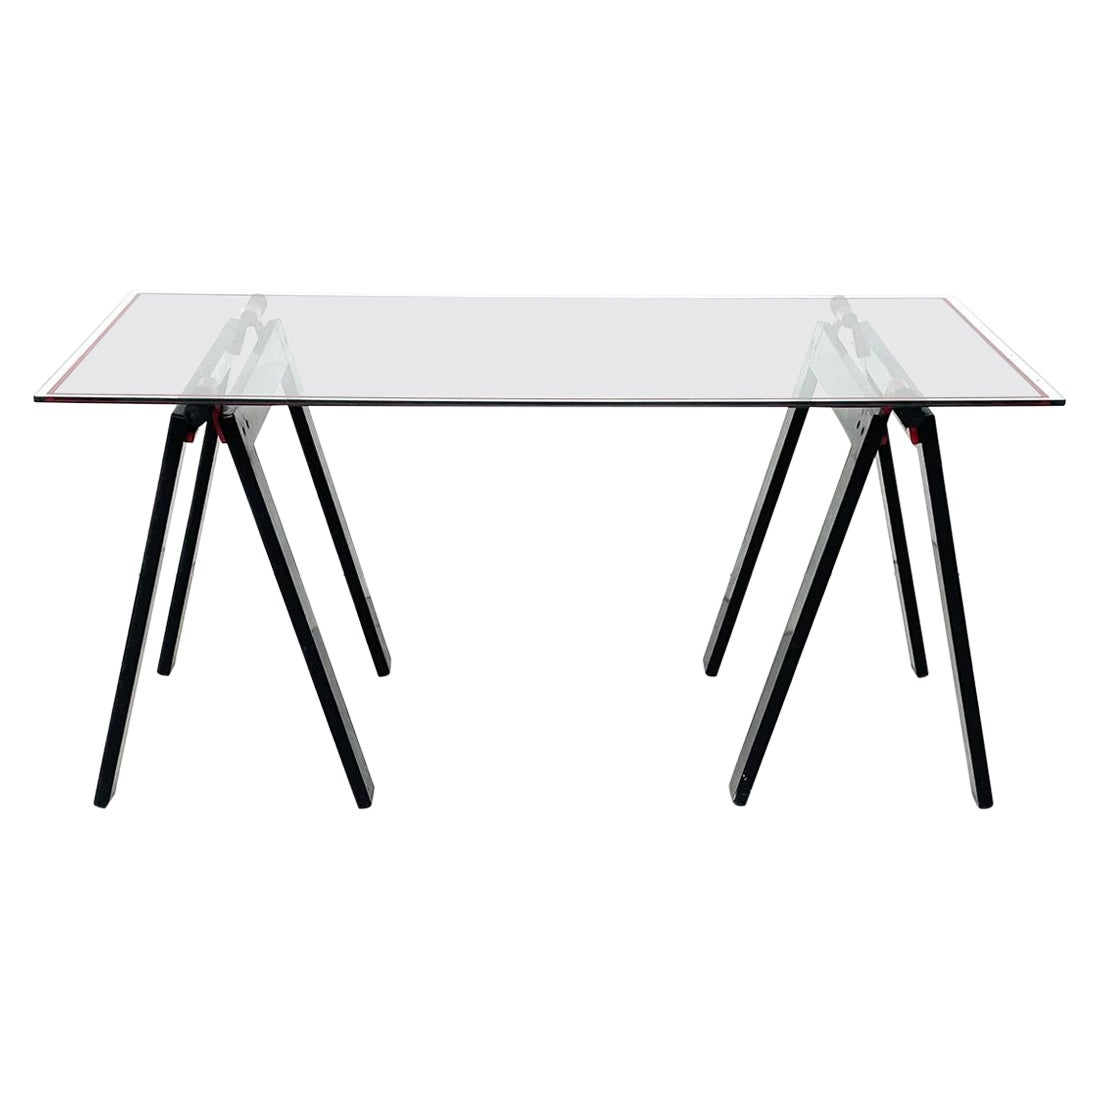 Mid-Century Modern Desk/Table by Gae Aulenti for Zanotta, Italy, 1970s For Sale